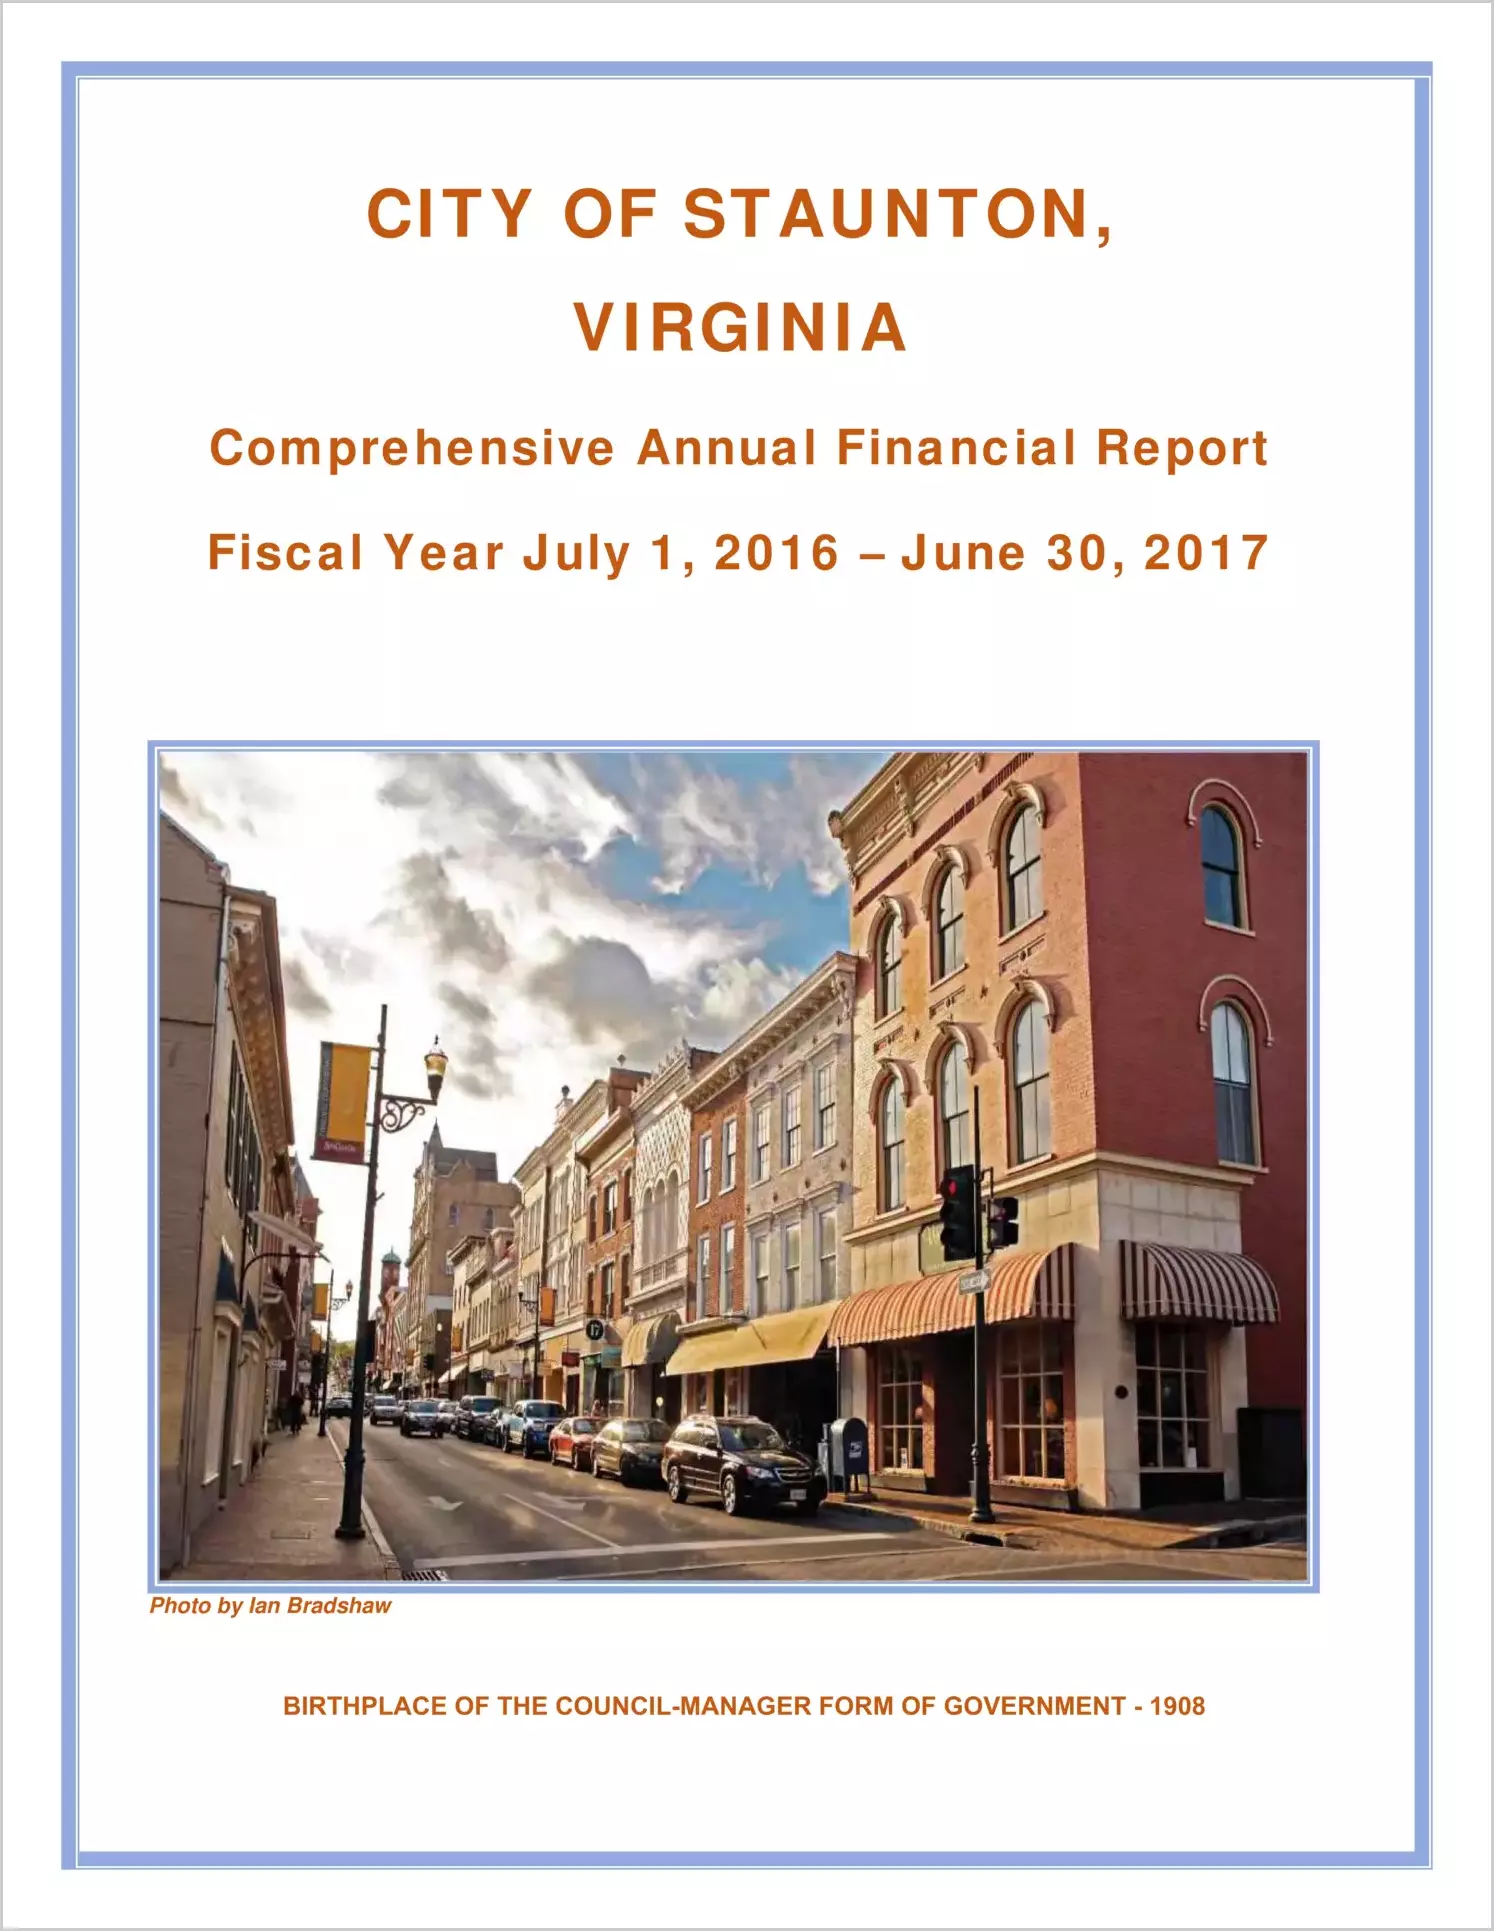 2017 Annual Financial Report for City of Staunton